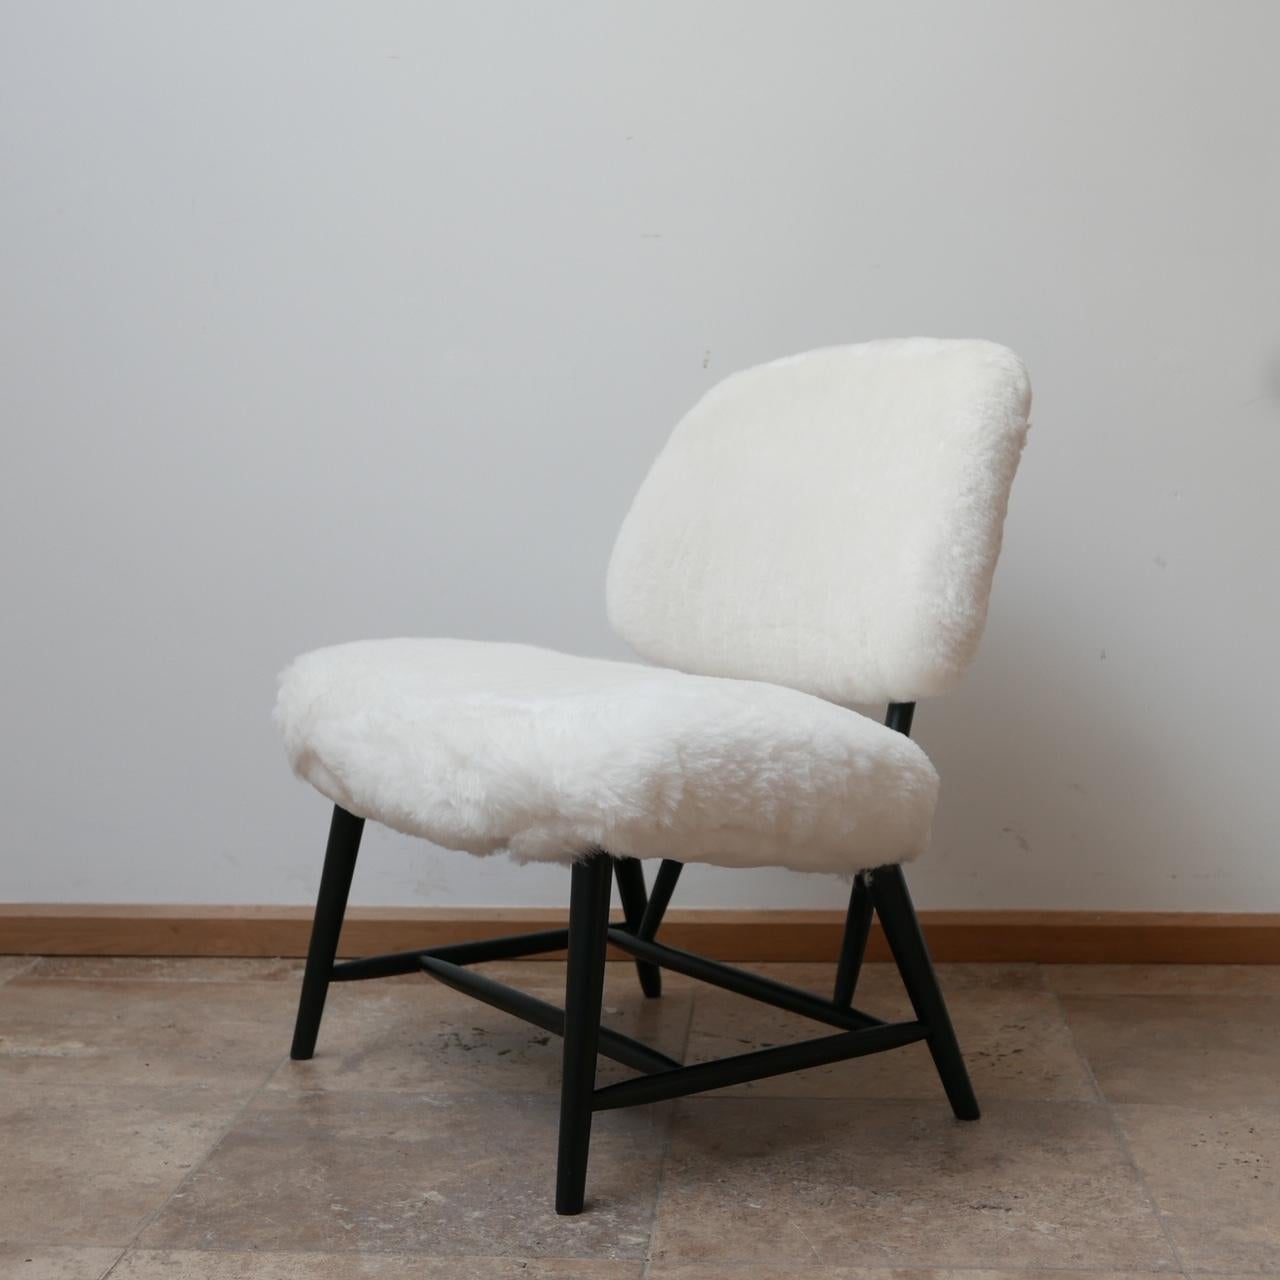 Pair of Alf Svensson 'TeVe' Sheepskin Shearling Lounge Chairs For Sale 5